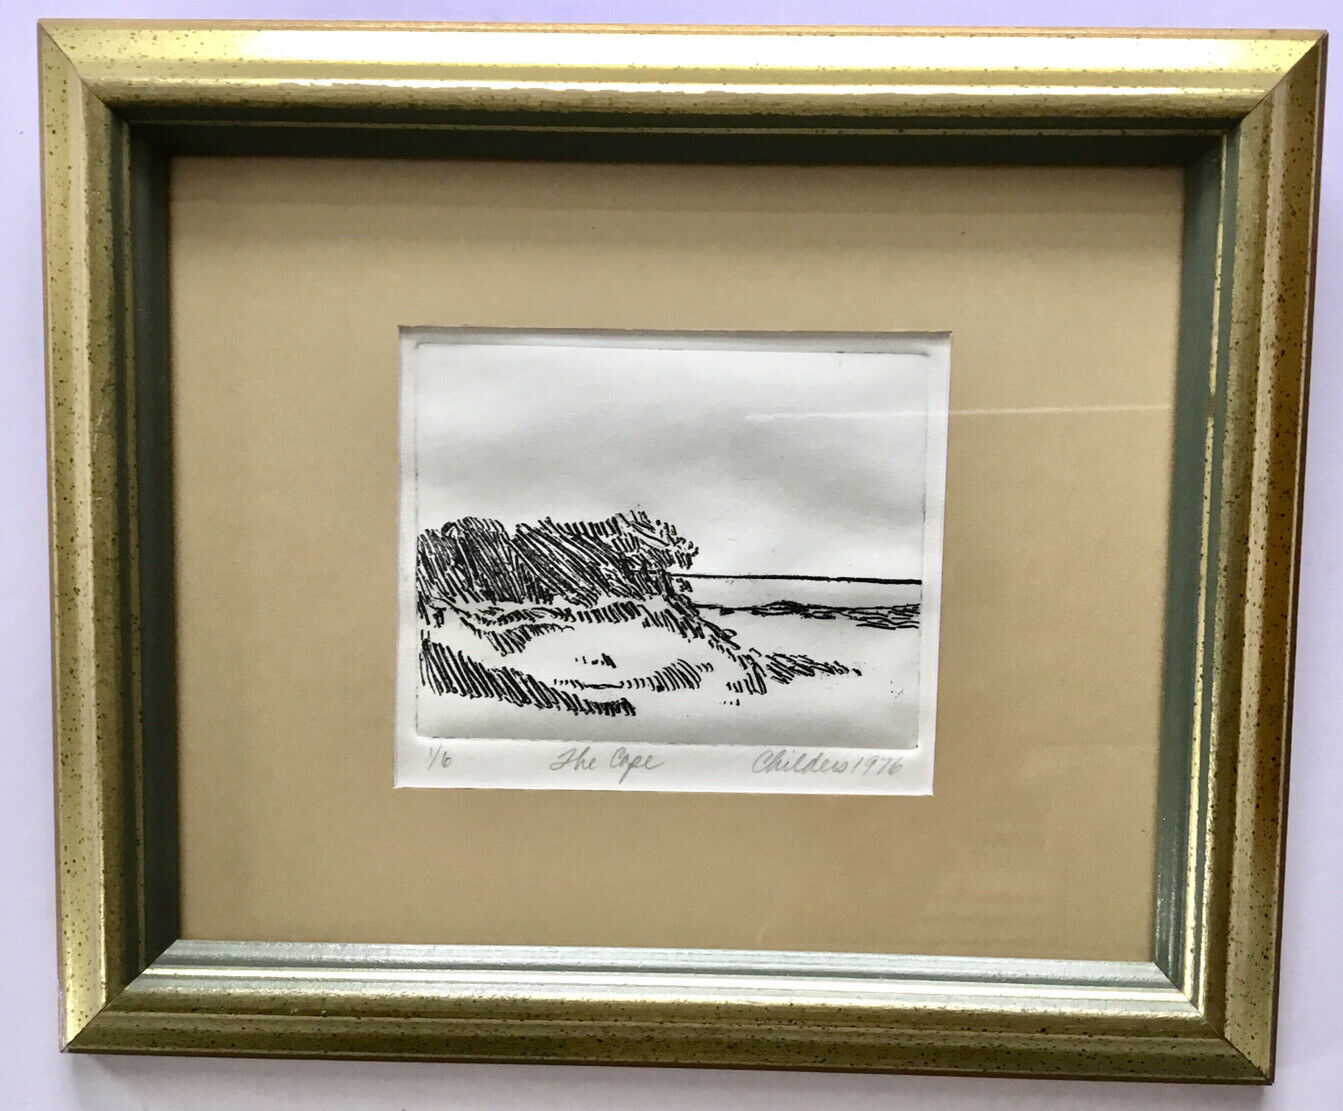 Childers 1976_Original Etching_1/6_”The Cape”_Signed LR_Framed_ExC_SHIPS FREE